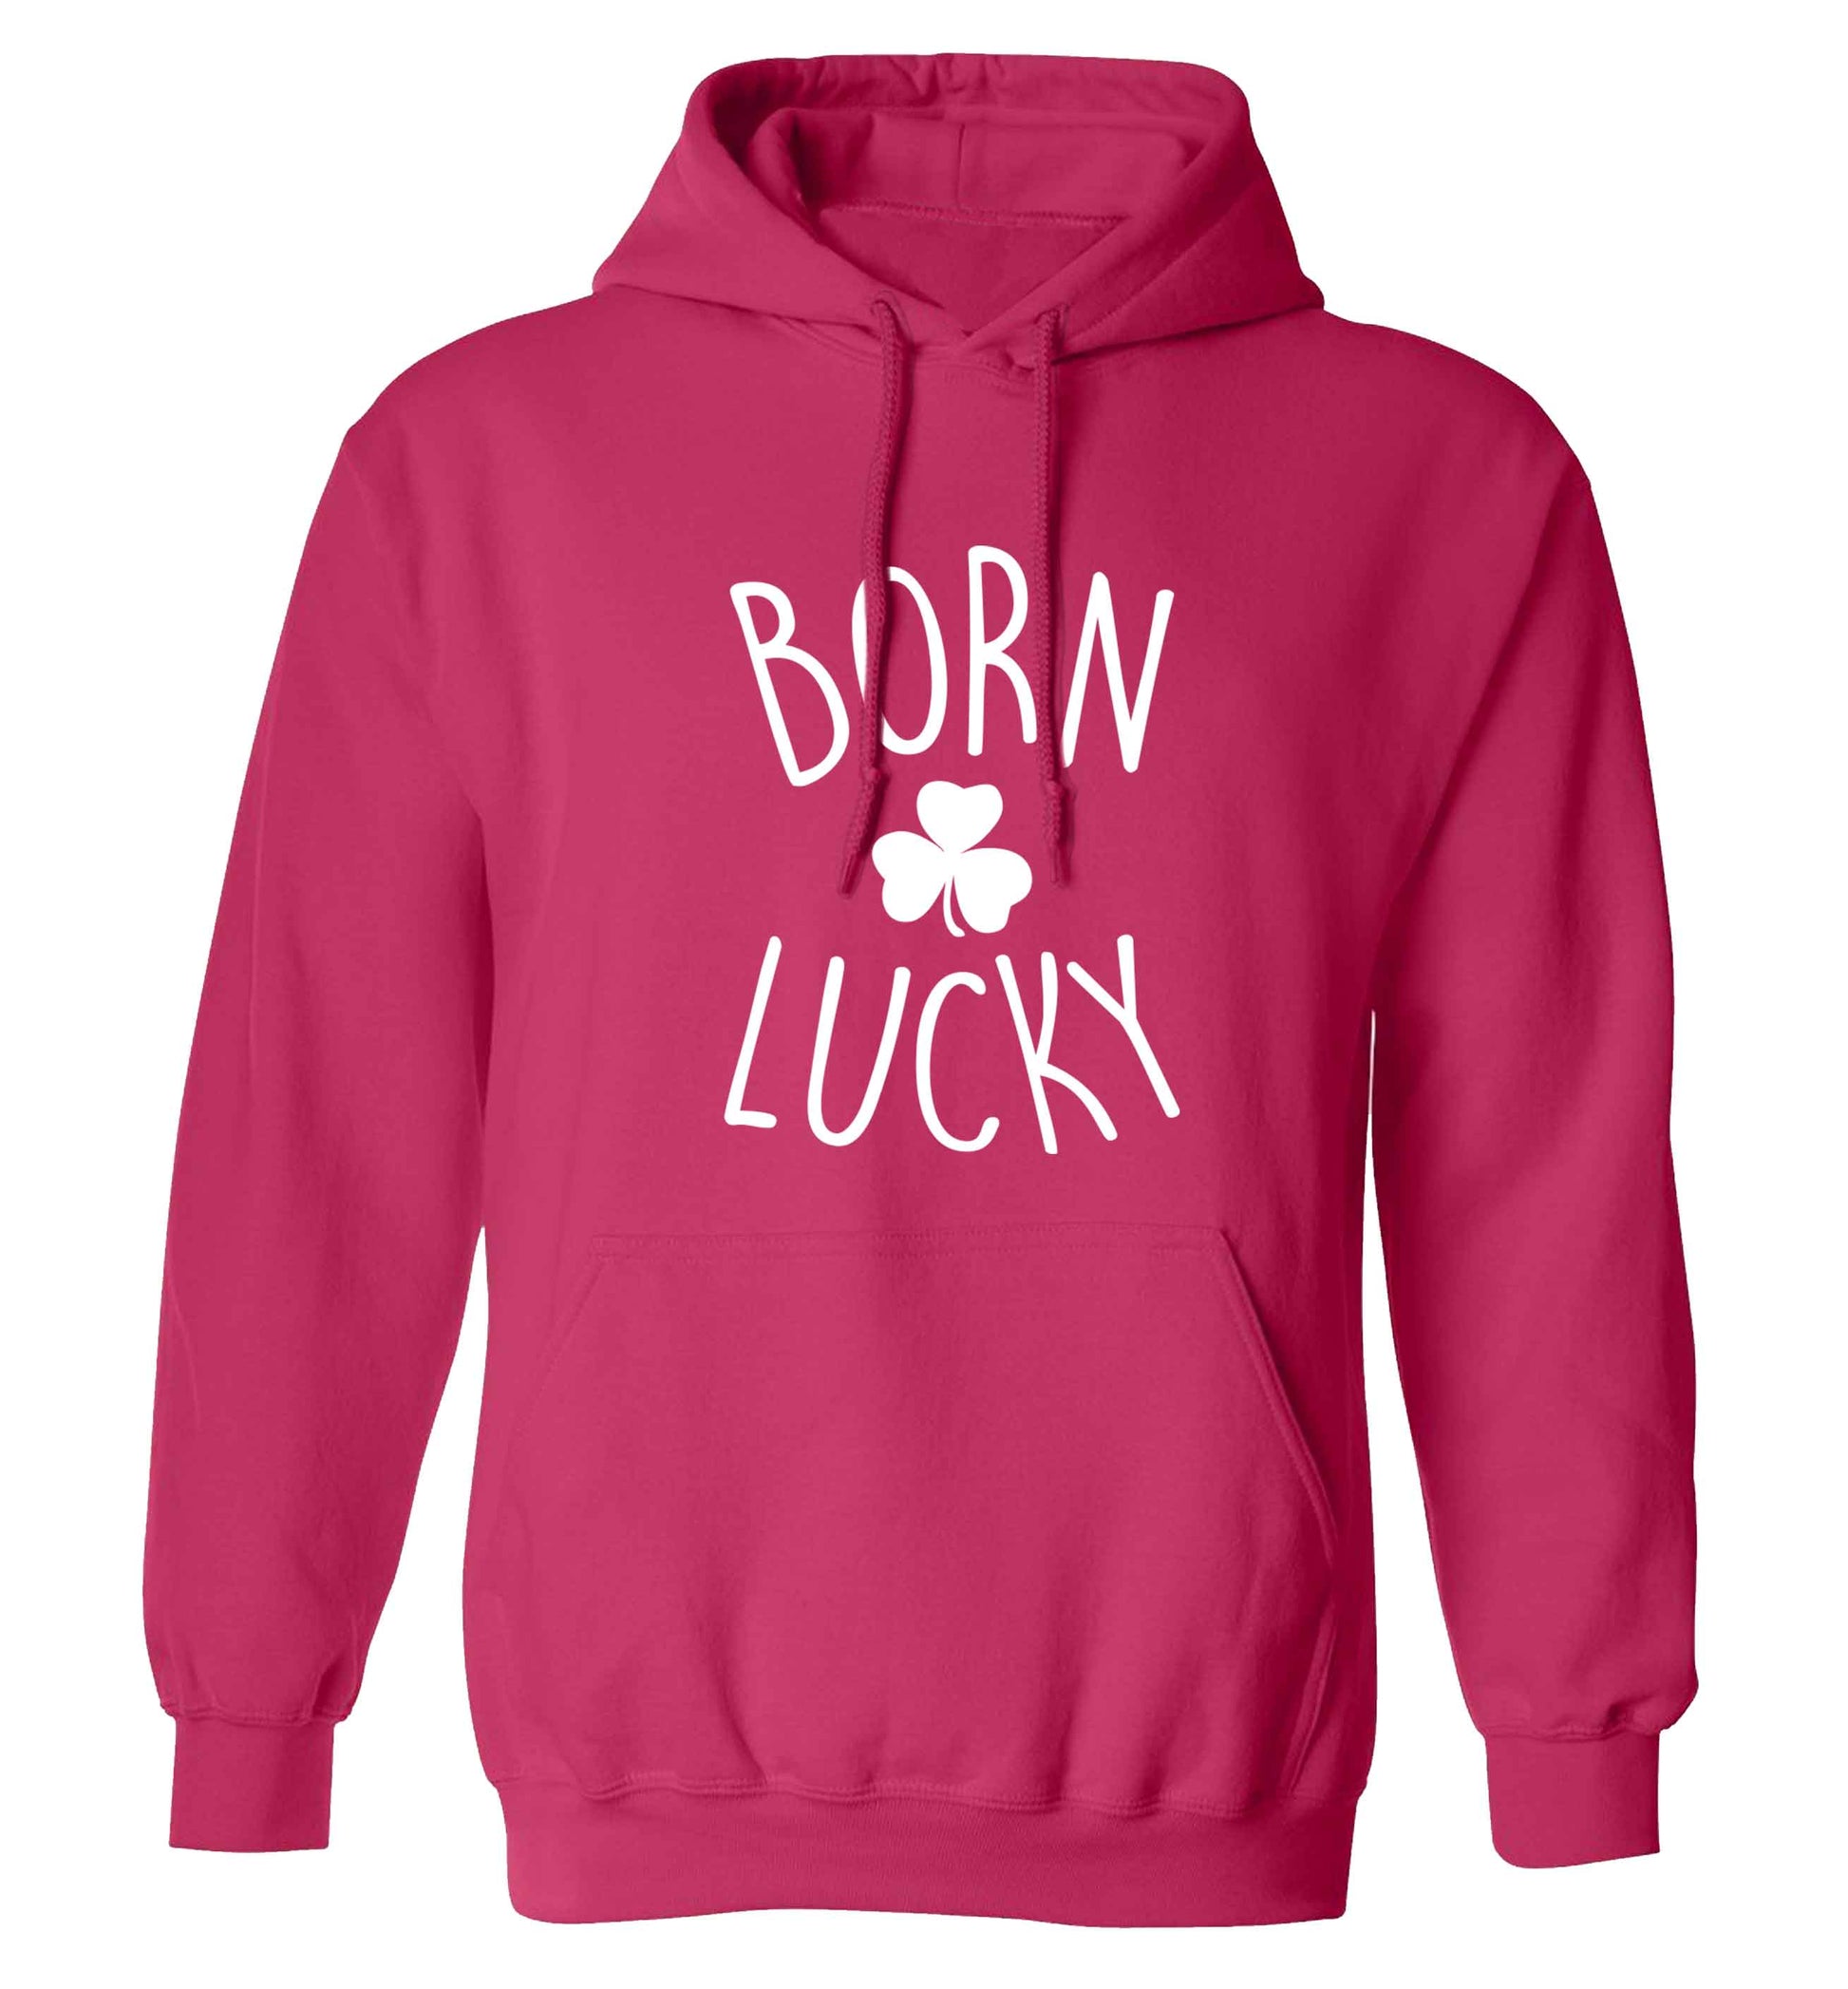 Born Lucky adults unisex pink hoodie 2XL